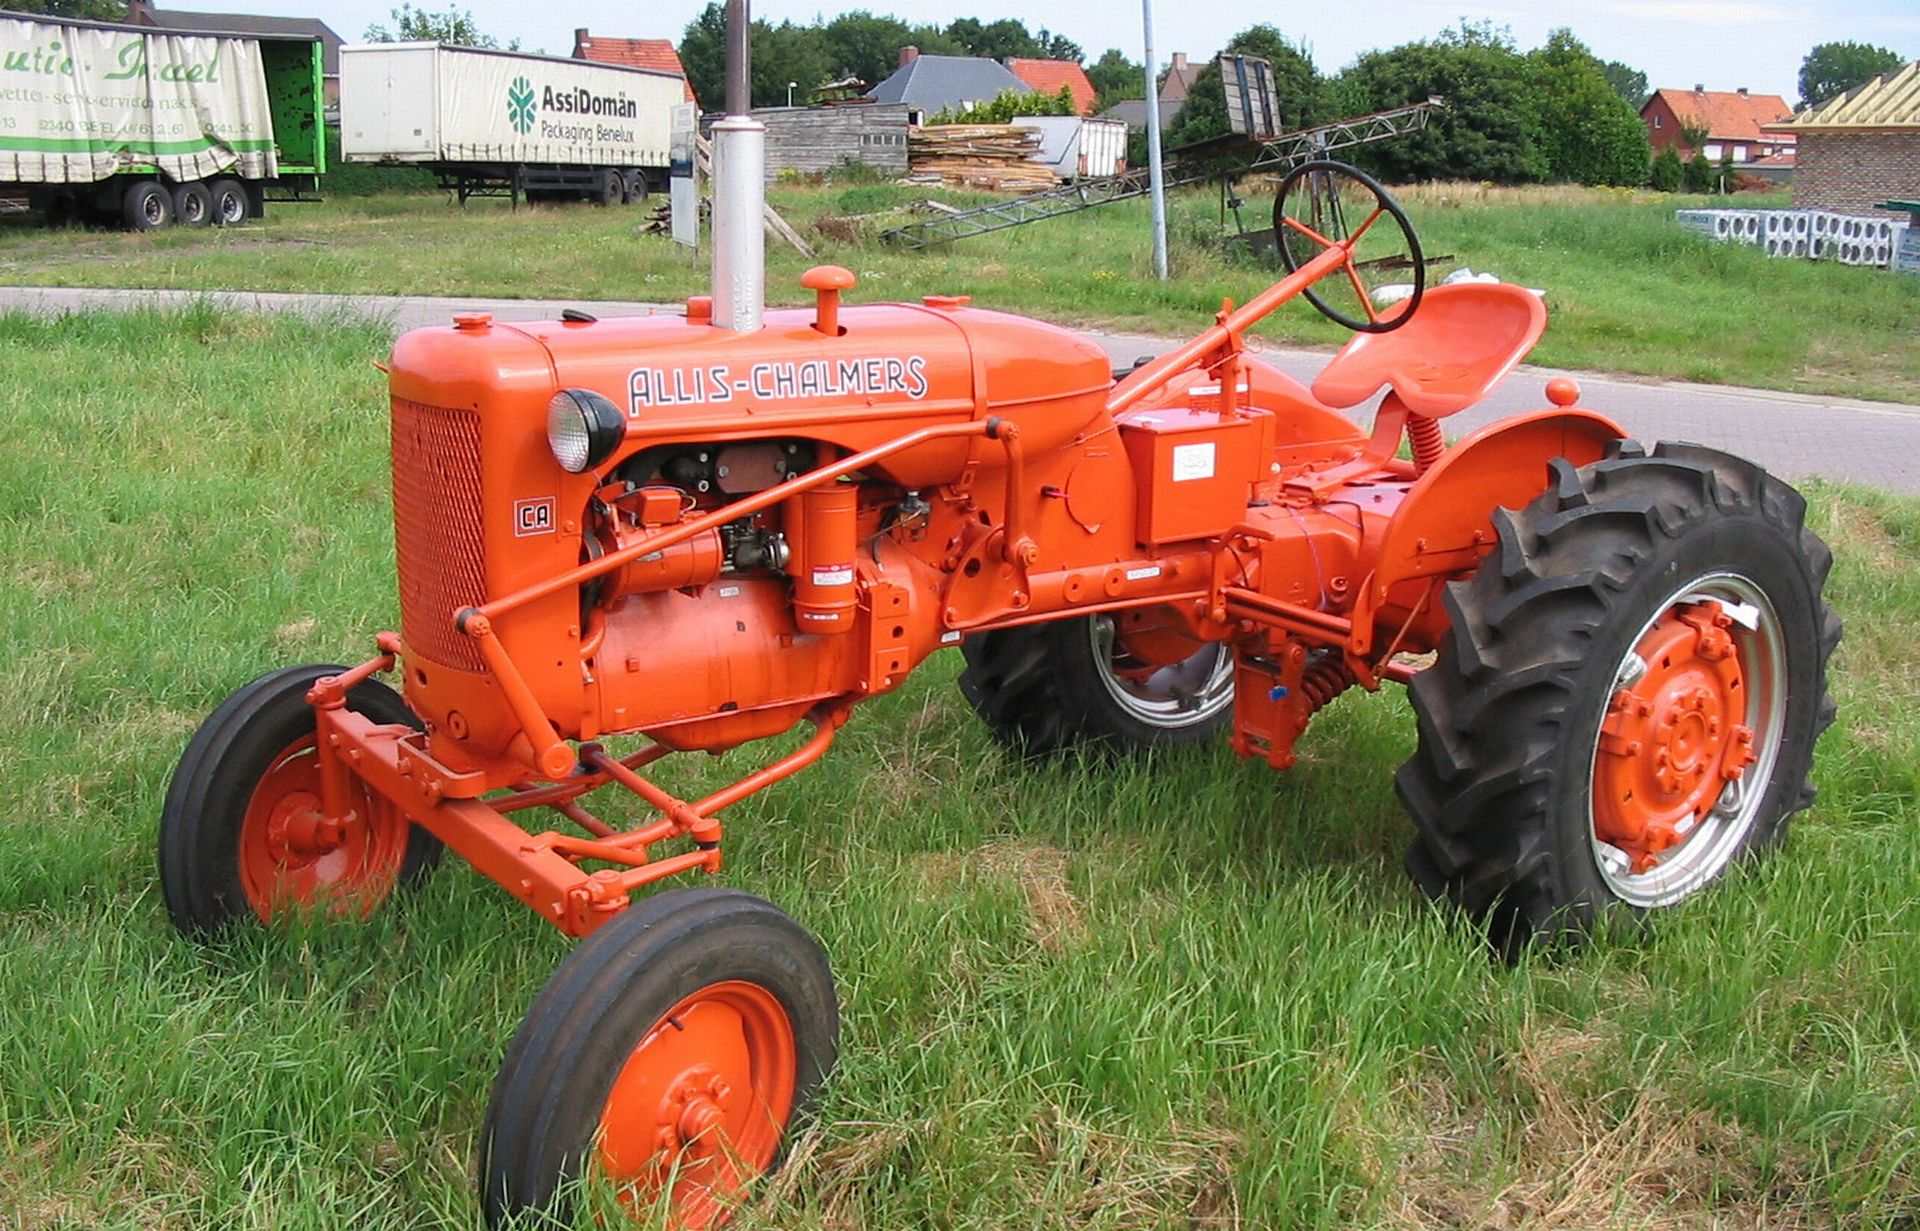 Allis Chalmers Tractors Related Keywords & Suggestions - Allis ...